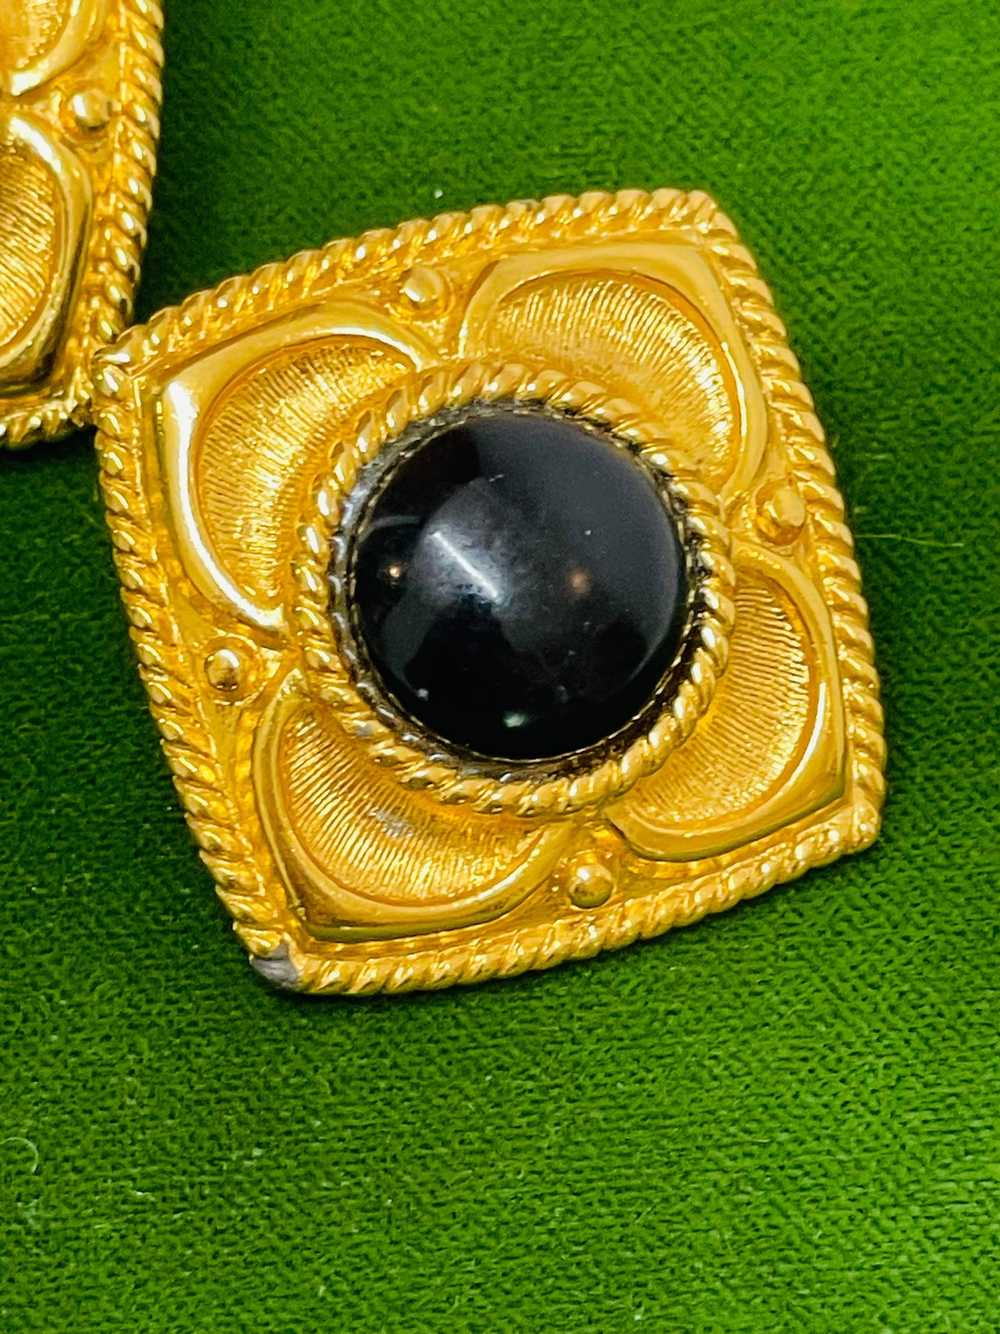 Napier Square Gold Earrings with Black Enamel Dome - image 2